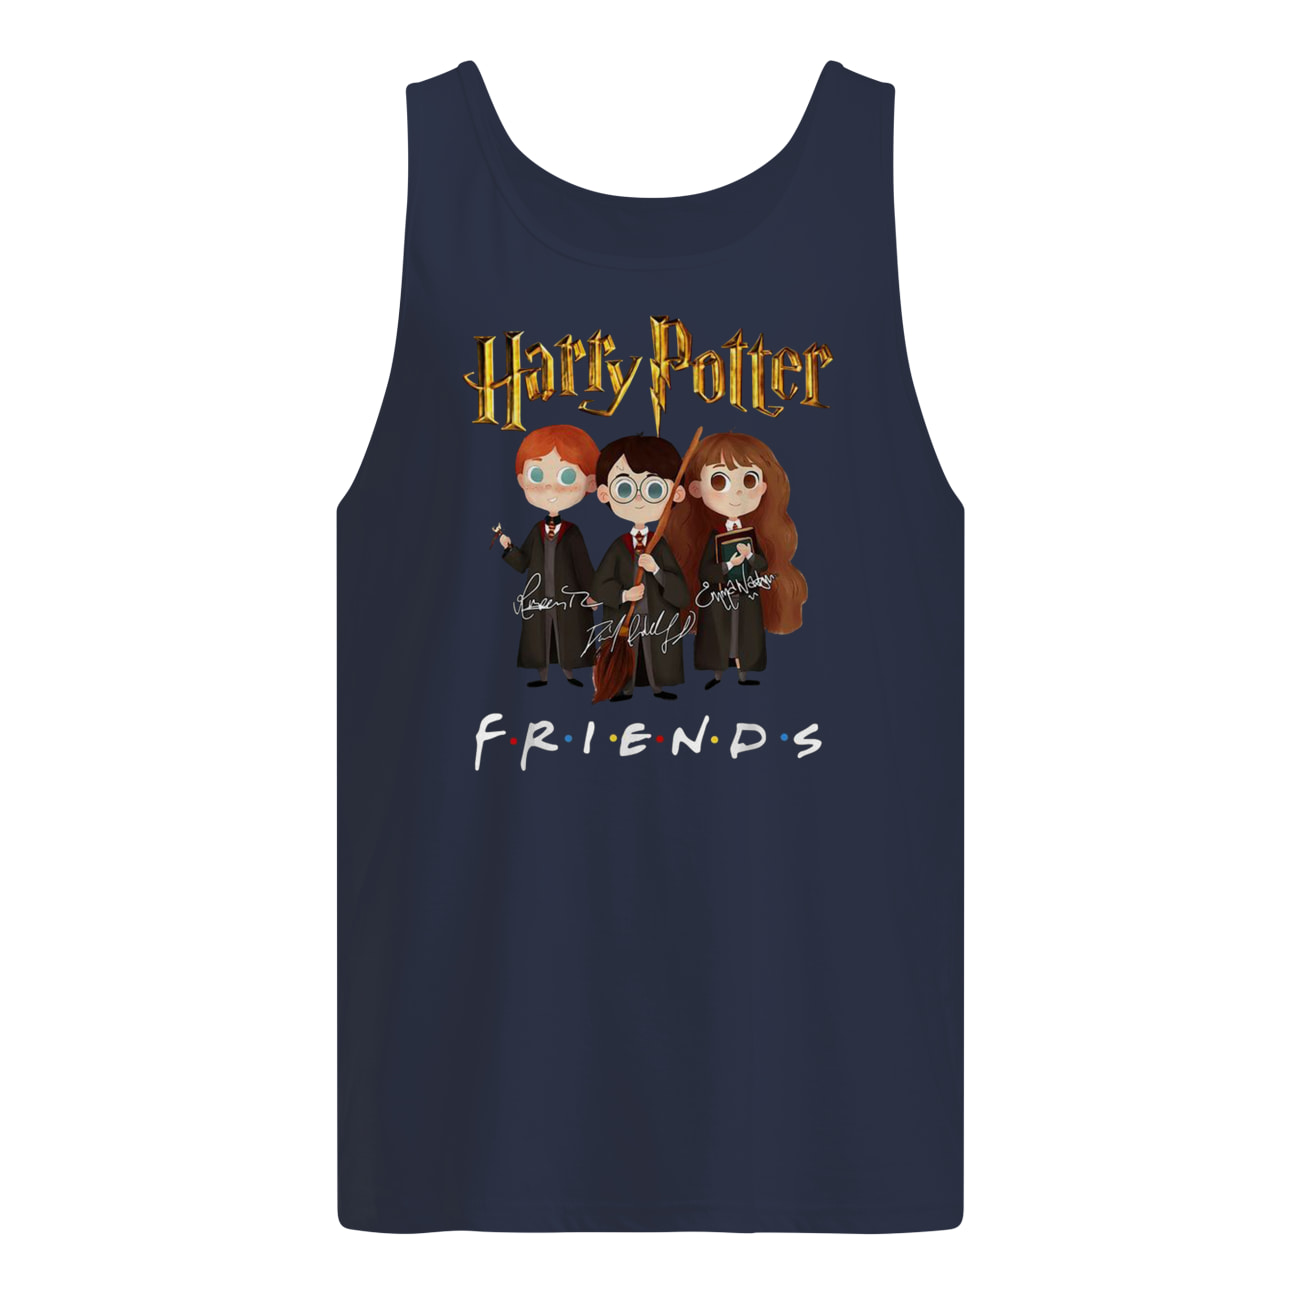 Harry potter characters friends tv show signatures tank top